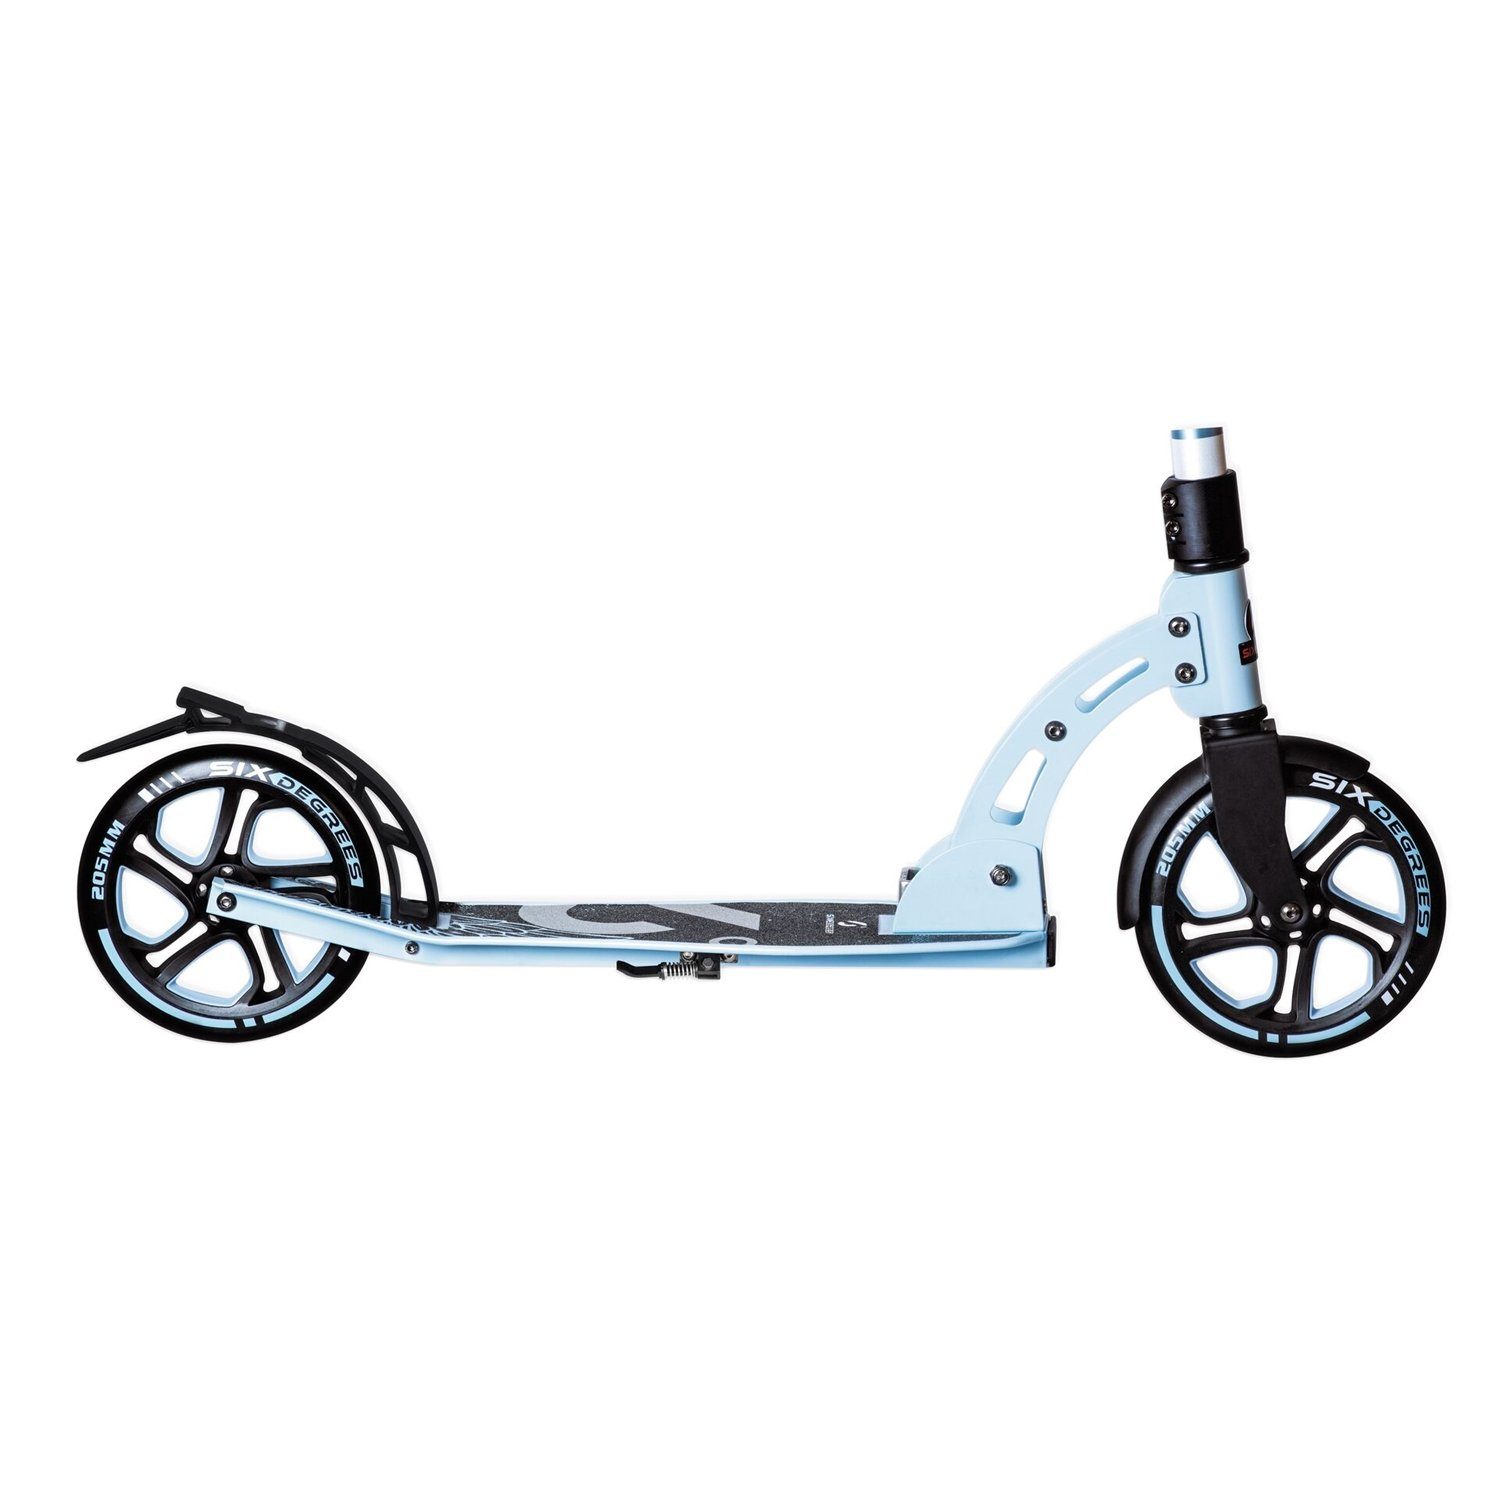 Scooter pastell-blau Aluminium DEGREES & sports SIX Scooter toys mm 205 authentic 568